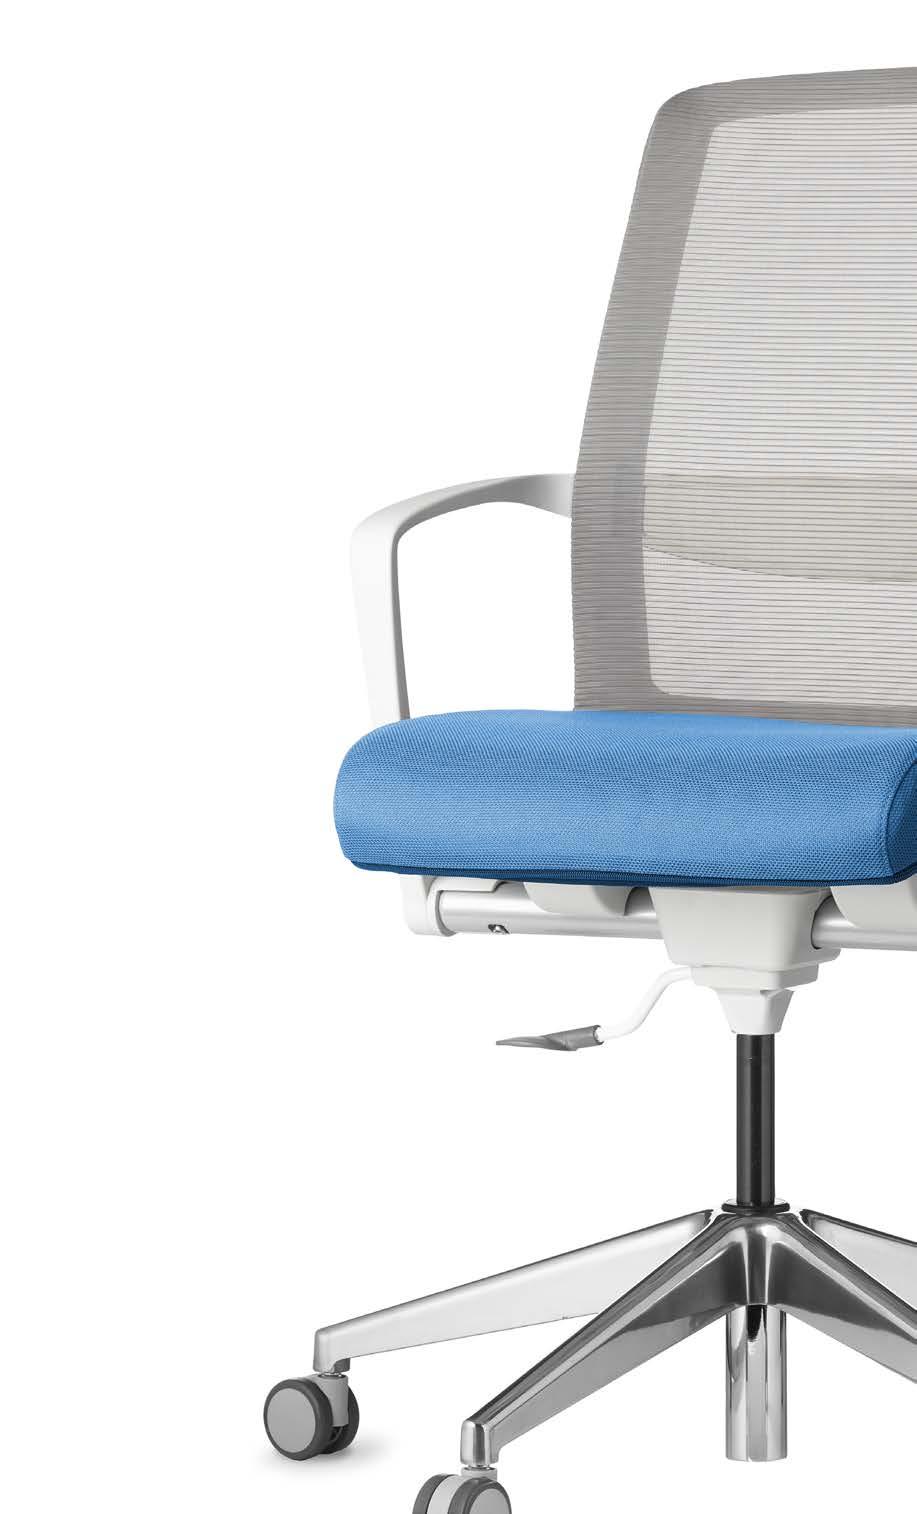 TIZU Work Features Height adjustable Mesh back with lumbar support Fixed Loops Arms with torsion tilt 8 fabric and 2 vinyl seat colors 5 Star Base with soft PU castors Available in Black and Light